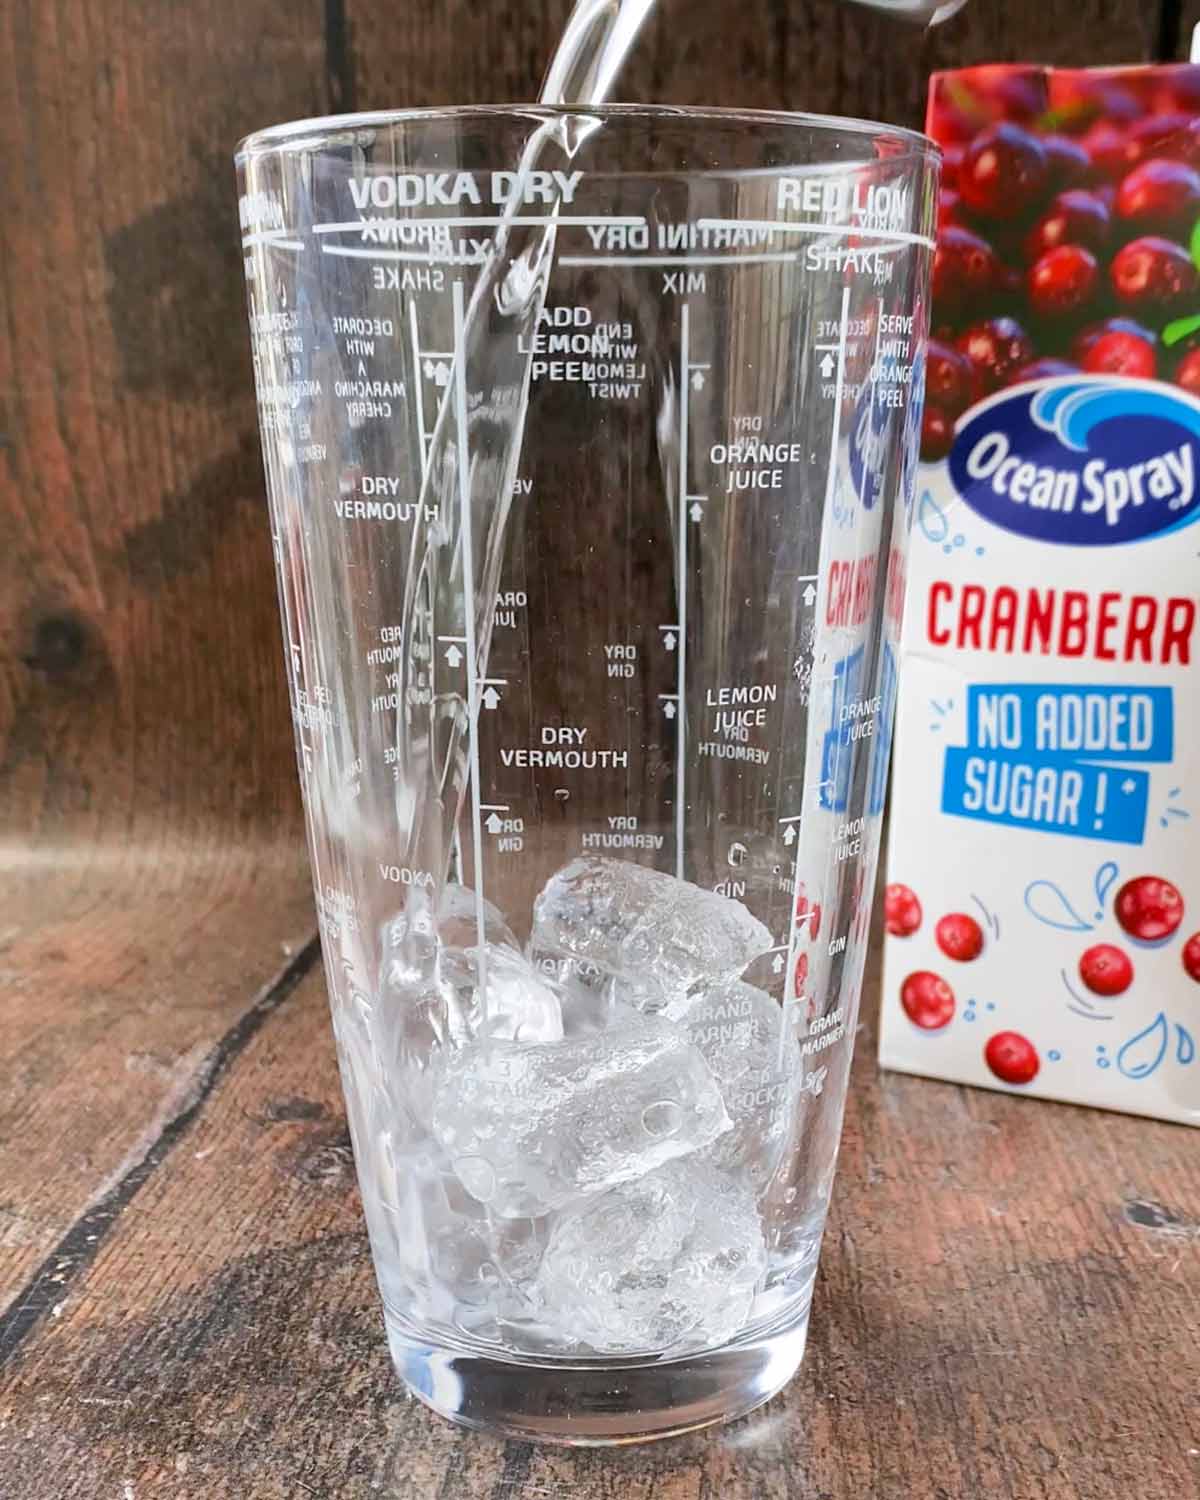 A cocktail shaker with ice cubes and vodka in it.